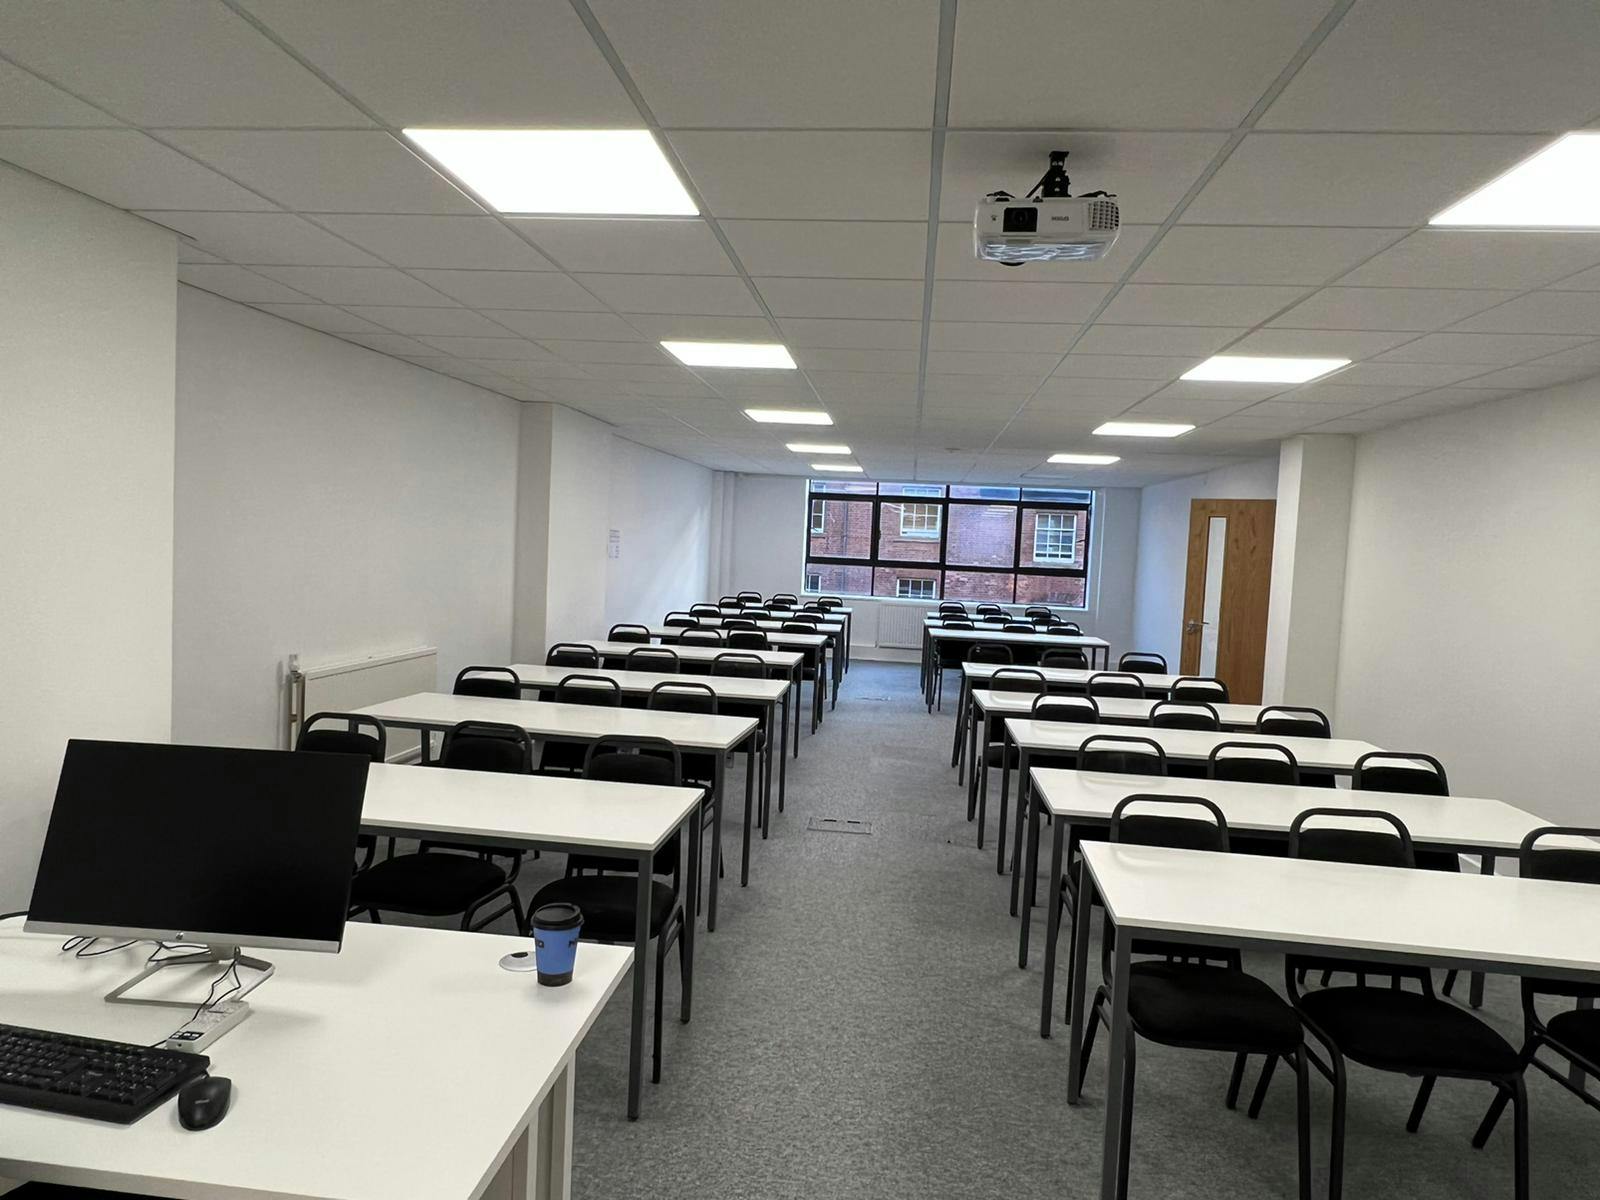 ESL Leeds undefined Coronet House Study and Classrooms